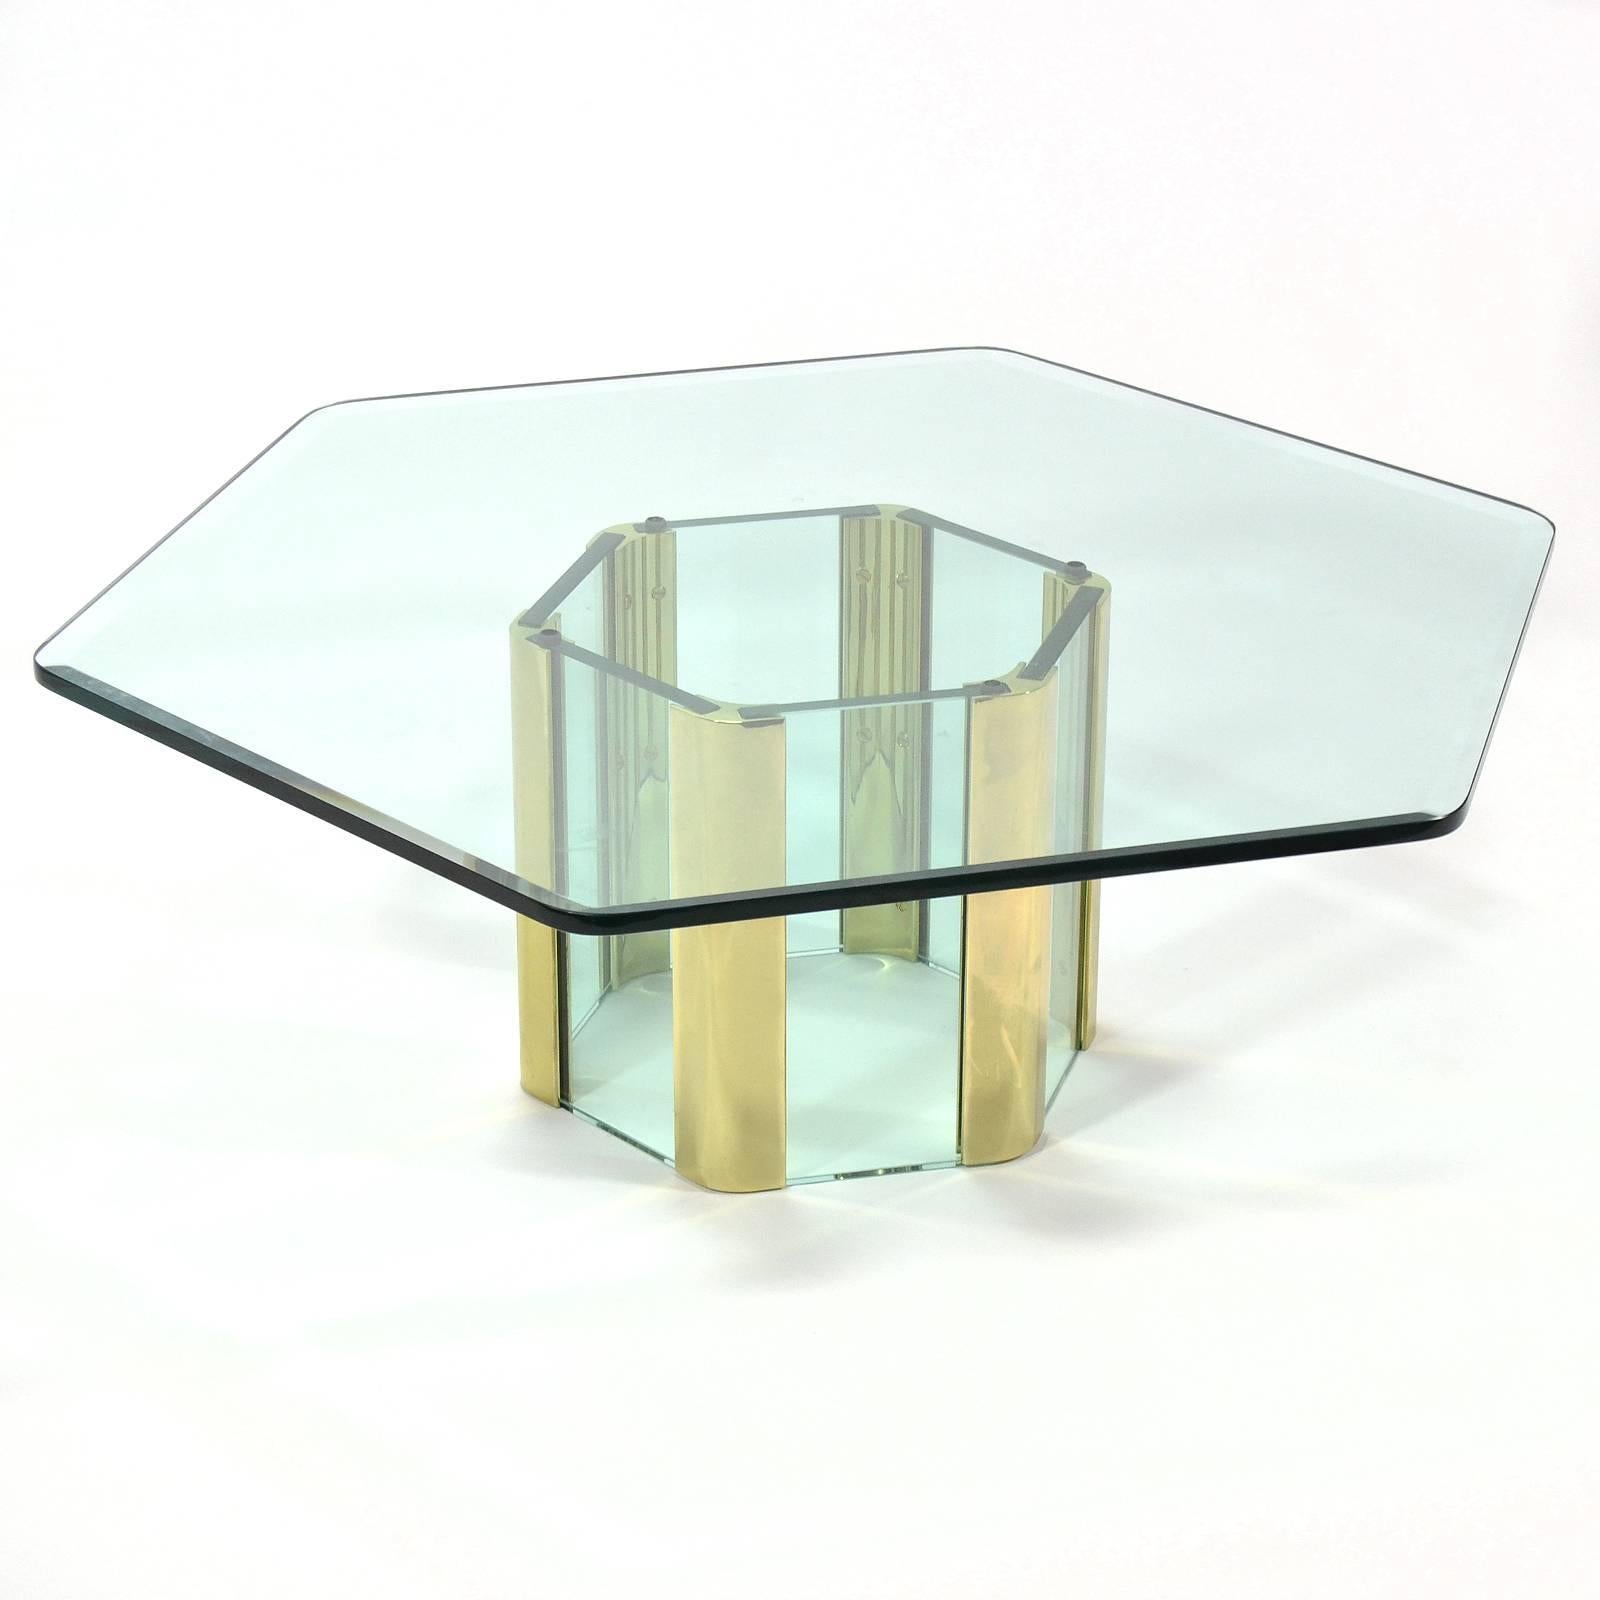 Pace Coffee Table with Hexagonal Designed by Leon Rosen 2